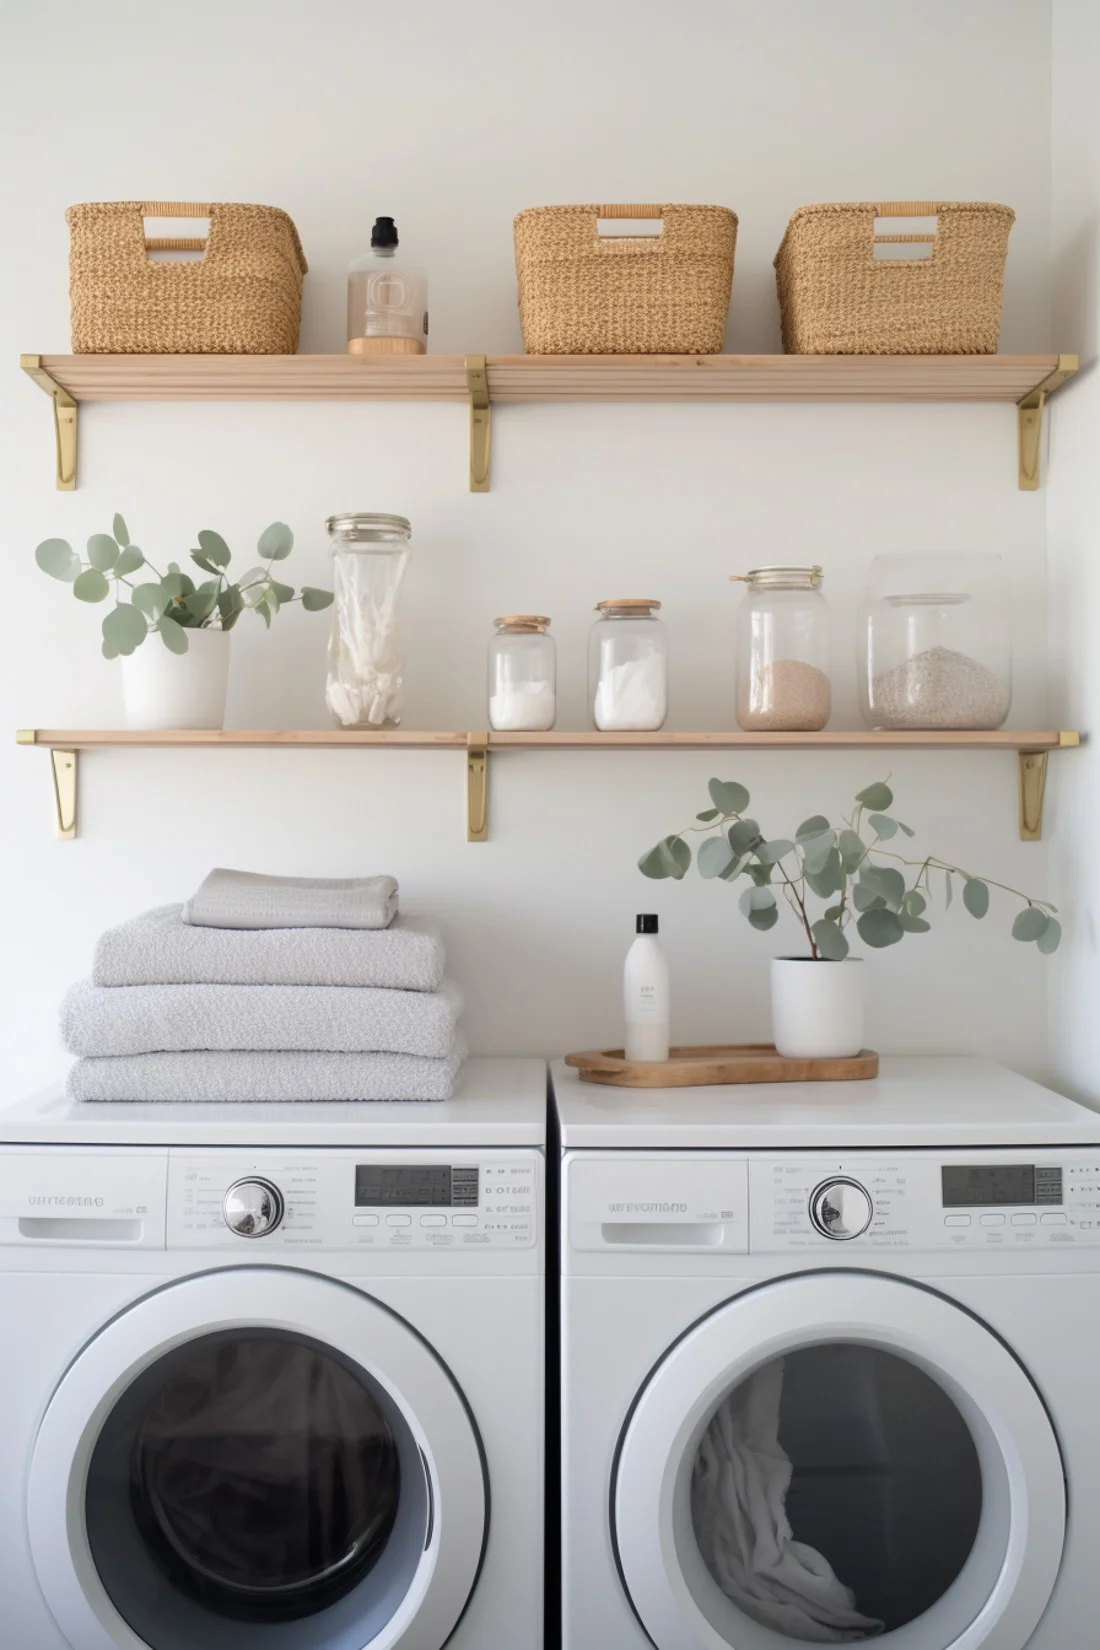 two wood and metal shelf ideas above a washer and dryer, with baskets, glass jars and towels